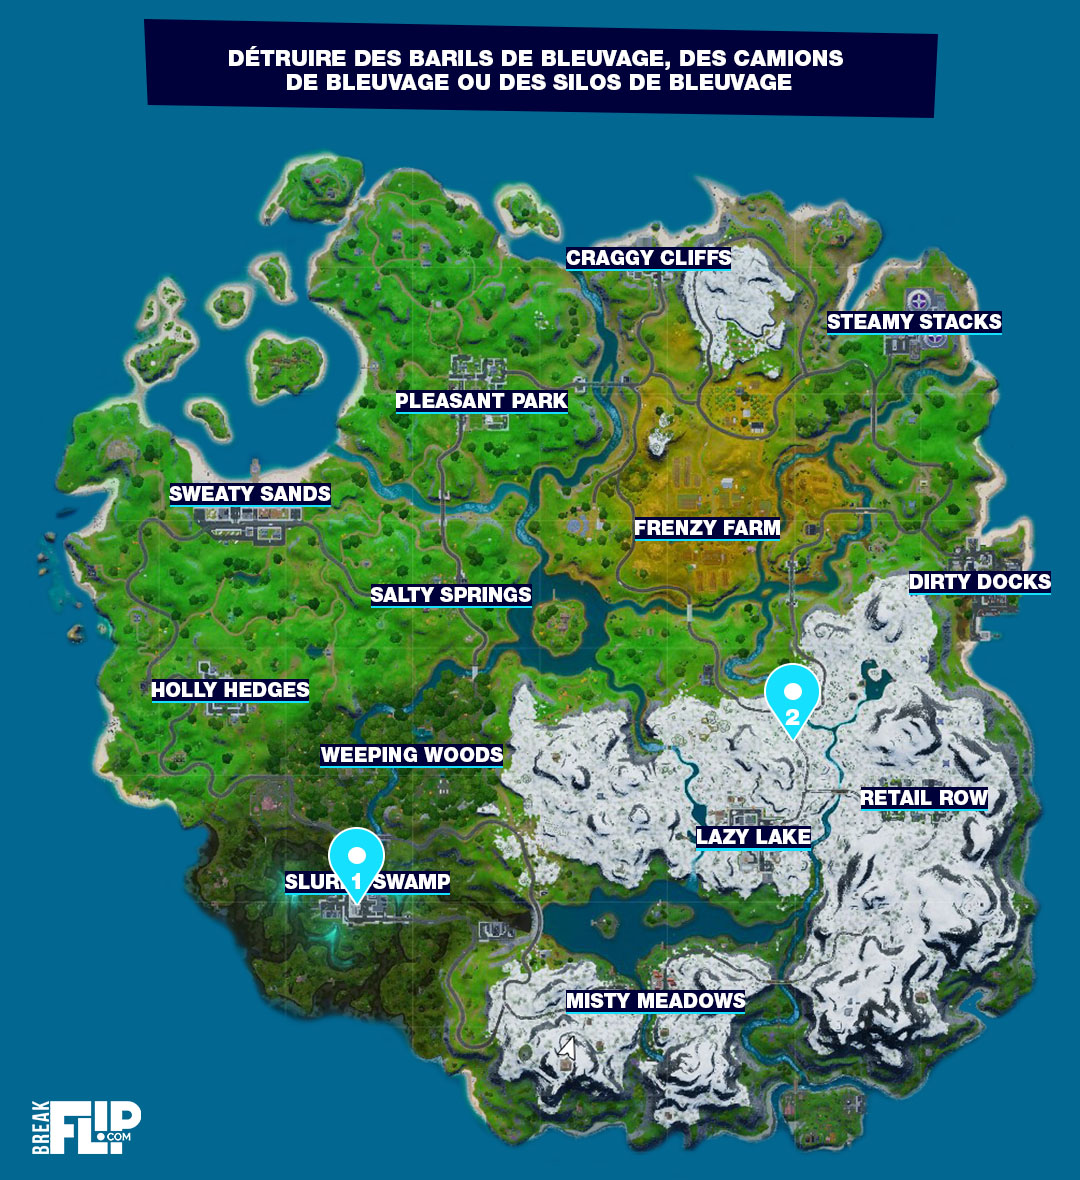 defi-bleuvage-emplacement-fortnite